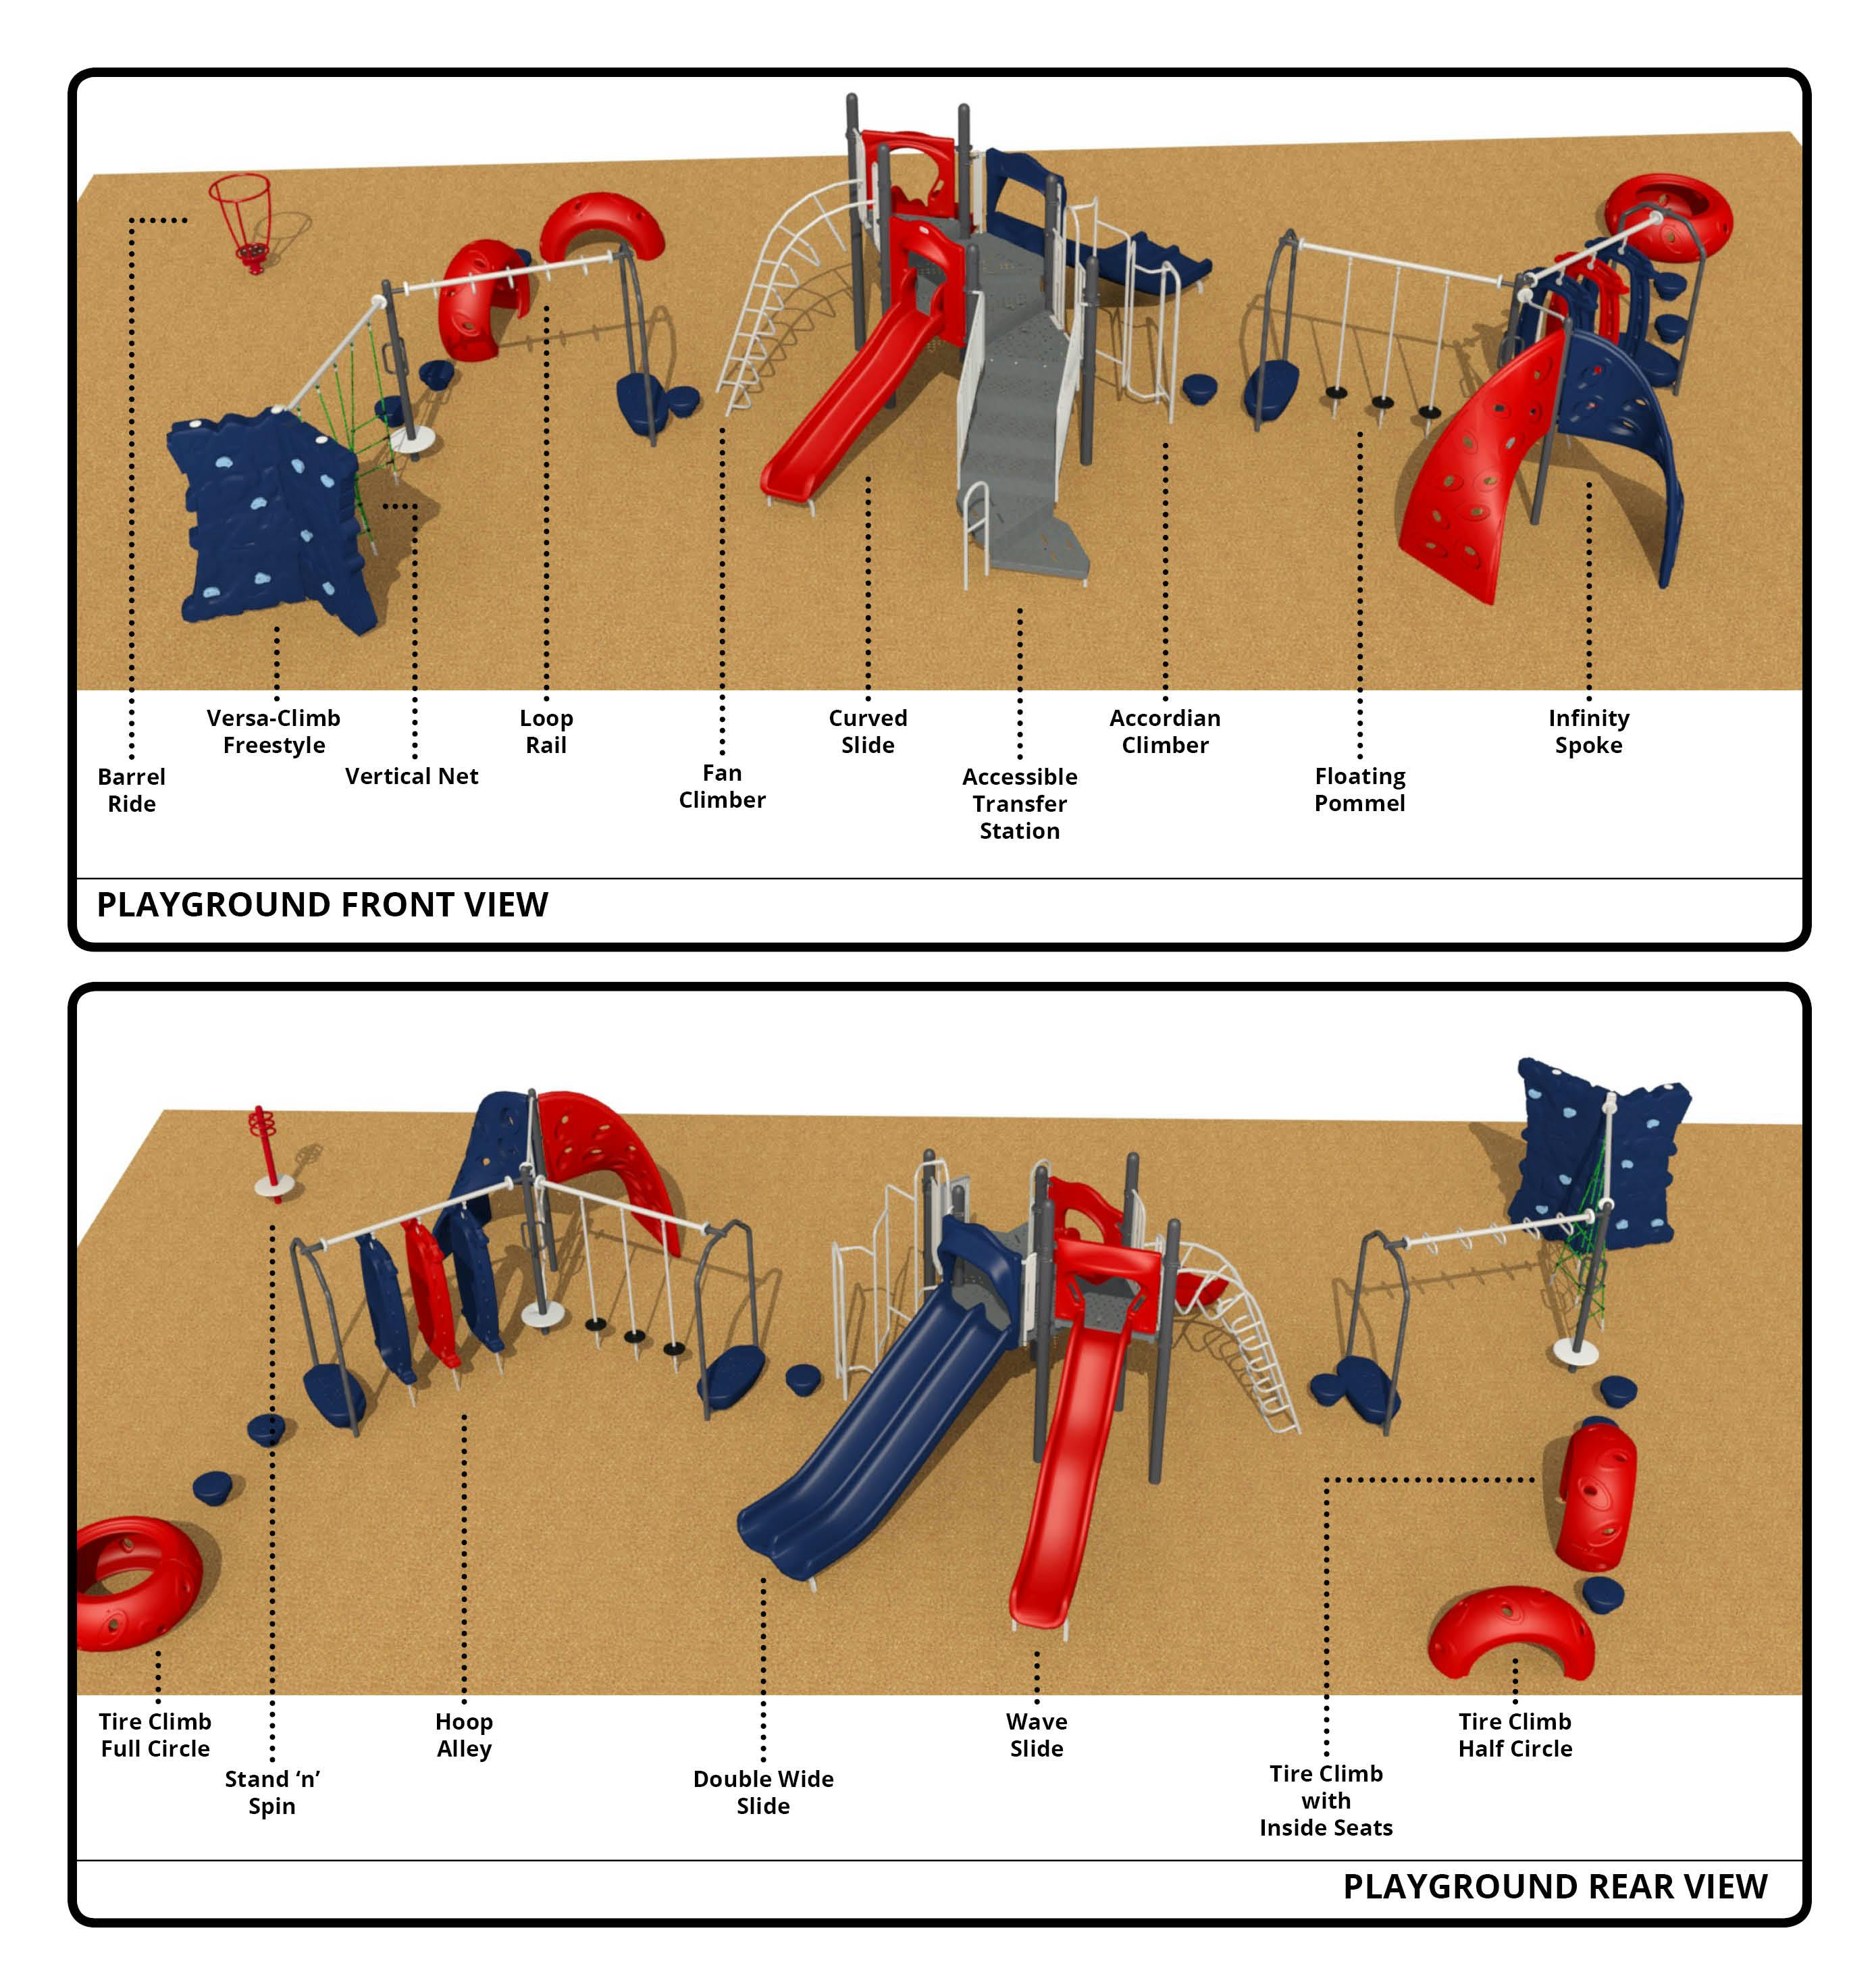 Final Playground Features